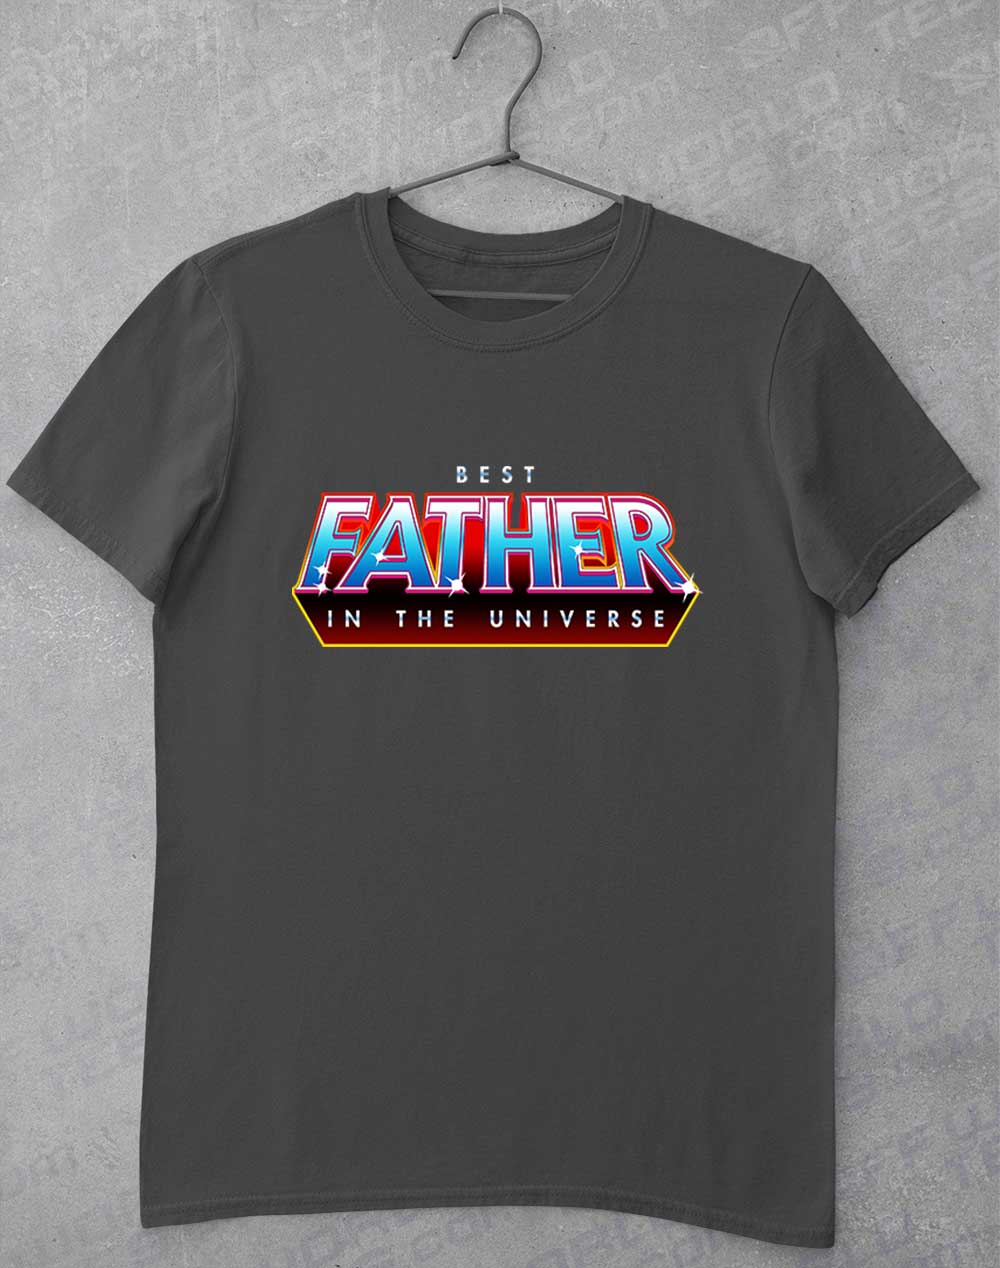 Charcoal - Best Father in the Universe T-Shirt